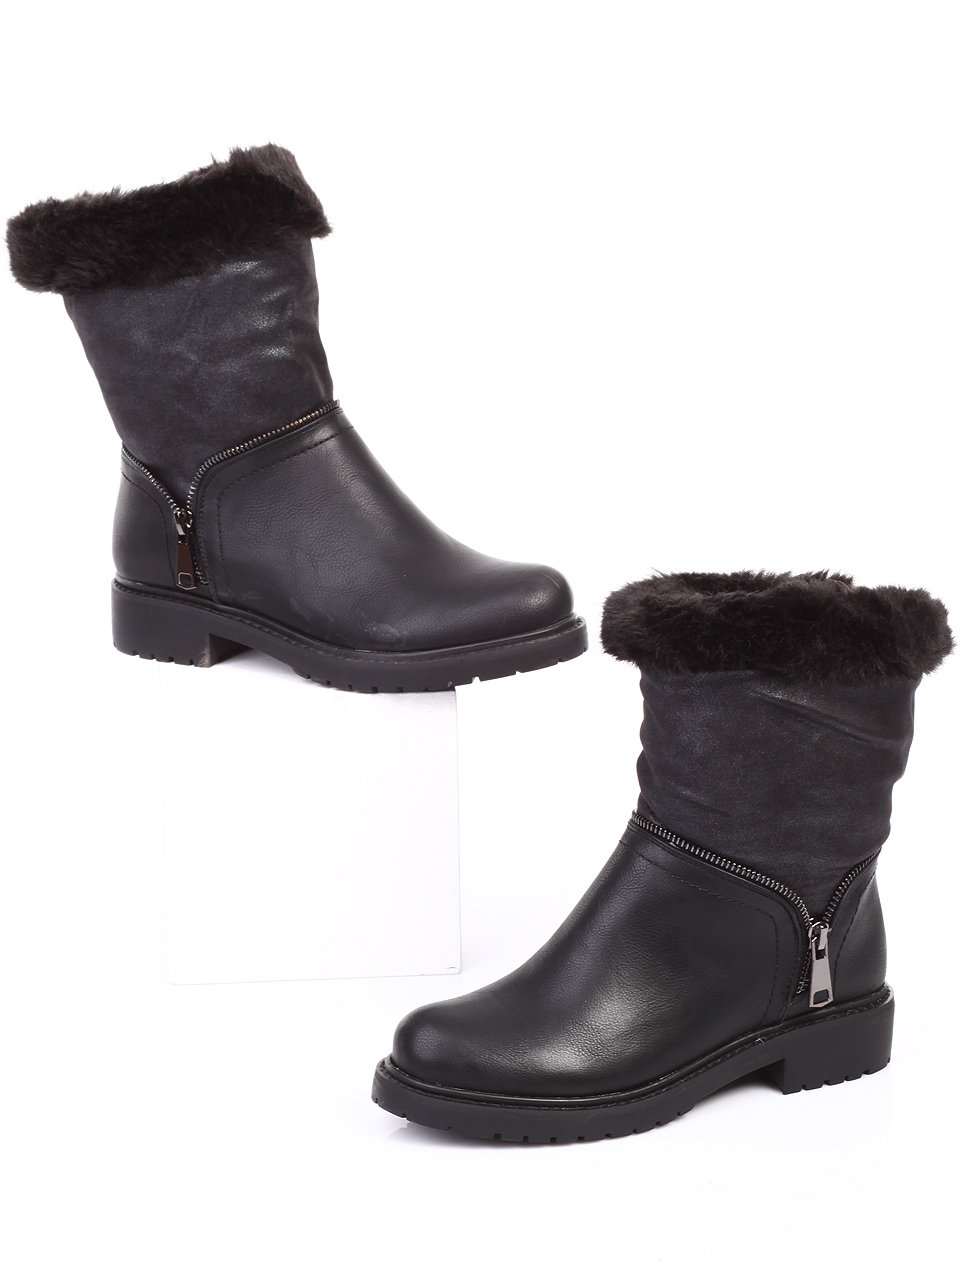 Black Leather Boots. Black Boots. Black Winter Boots. on Luulla